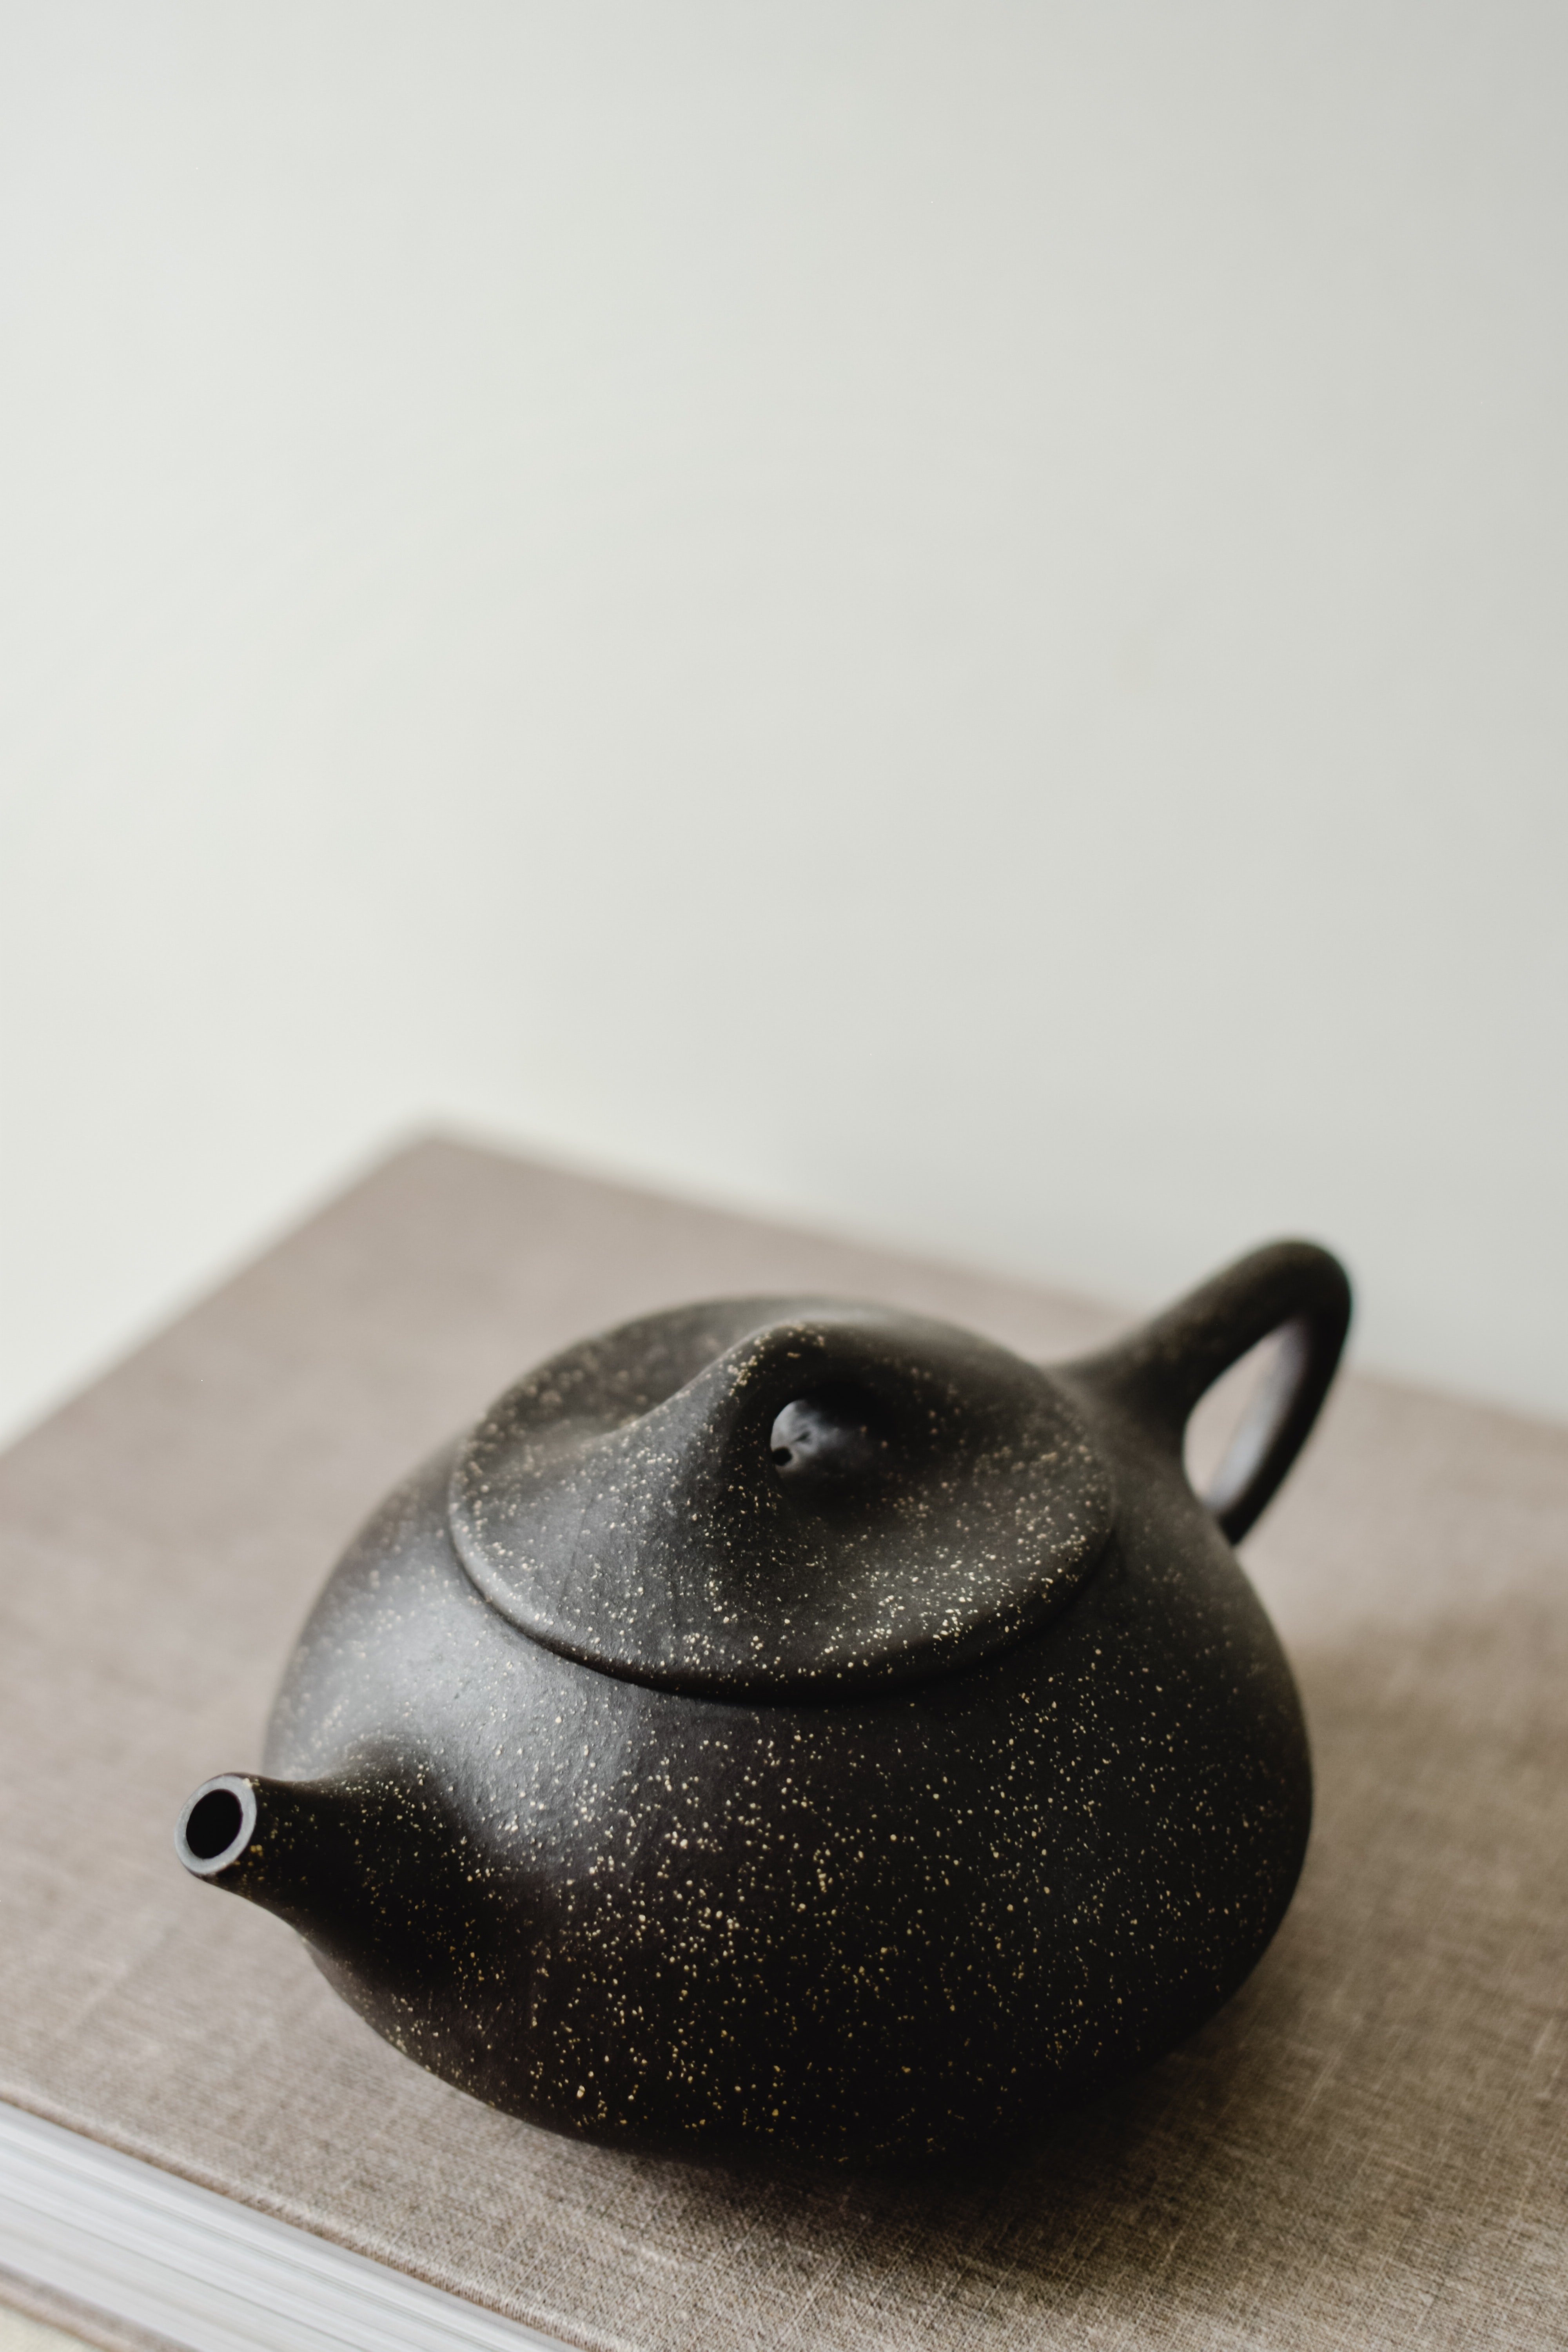 An image of a kettle | Photo: Pexels